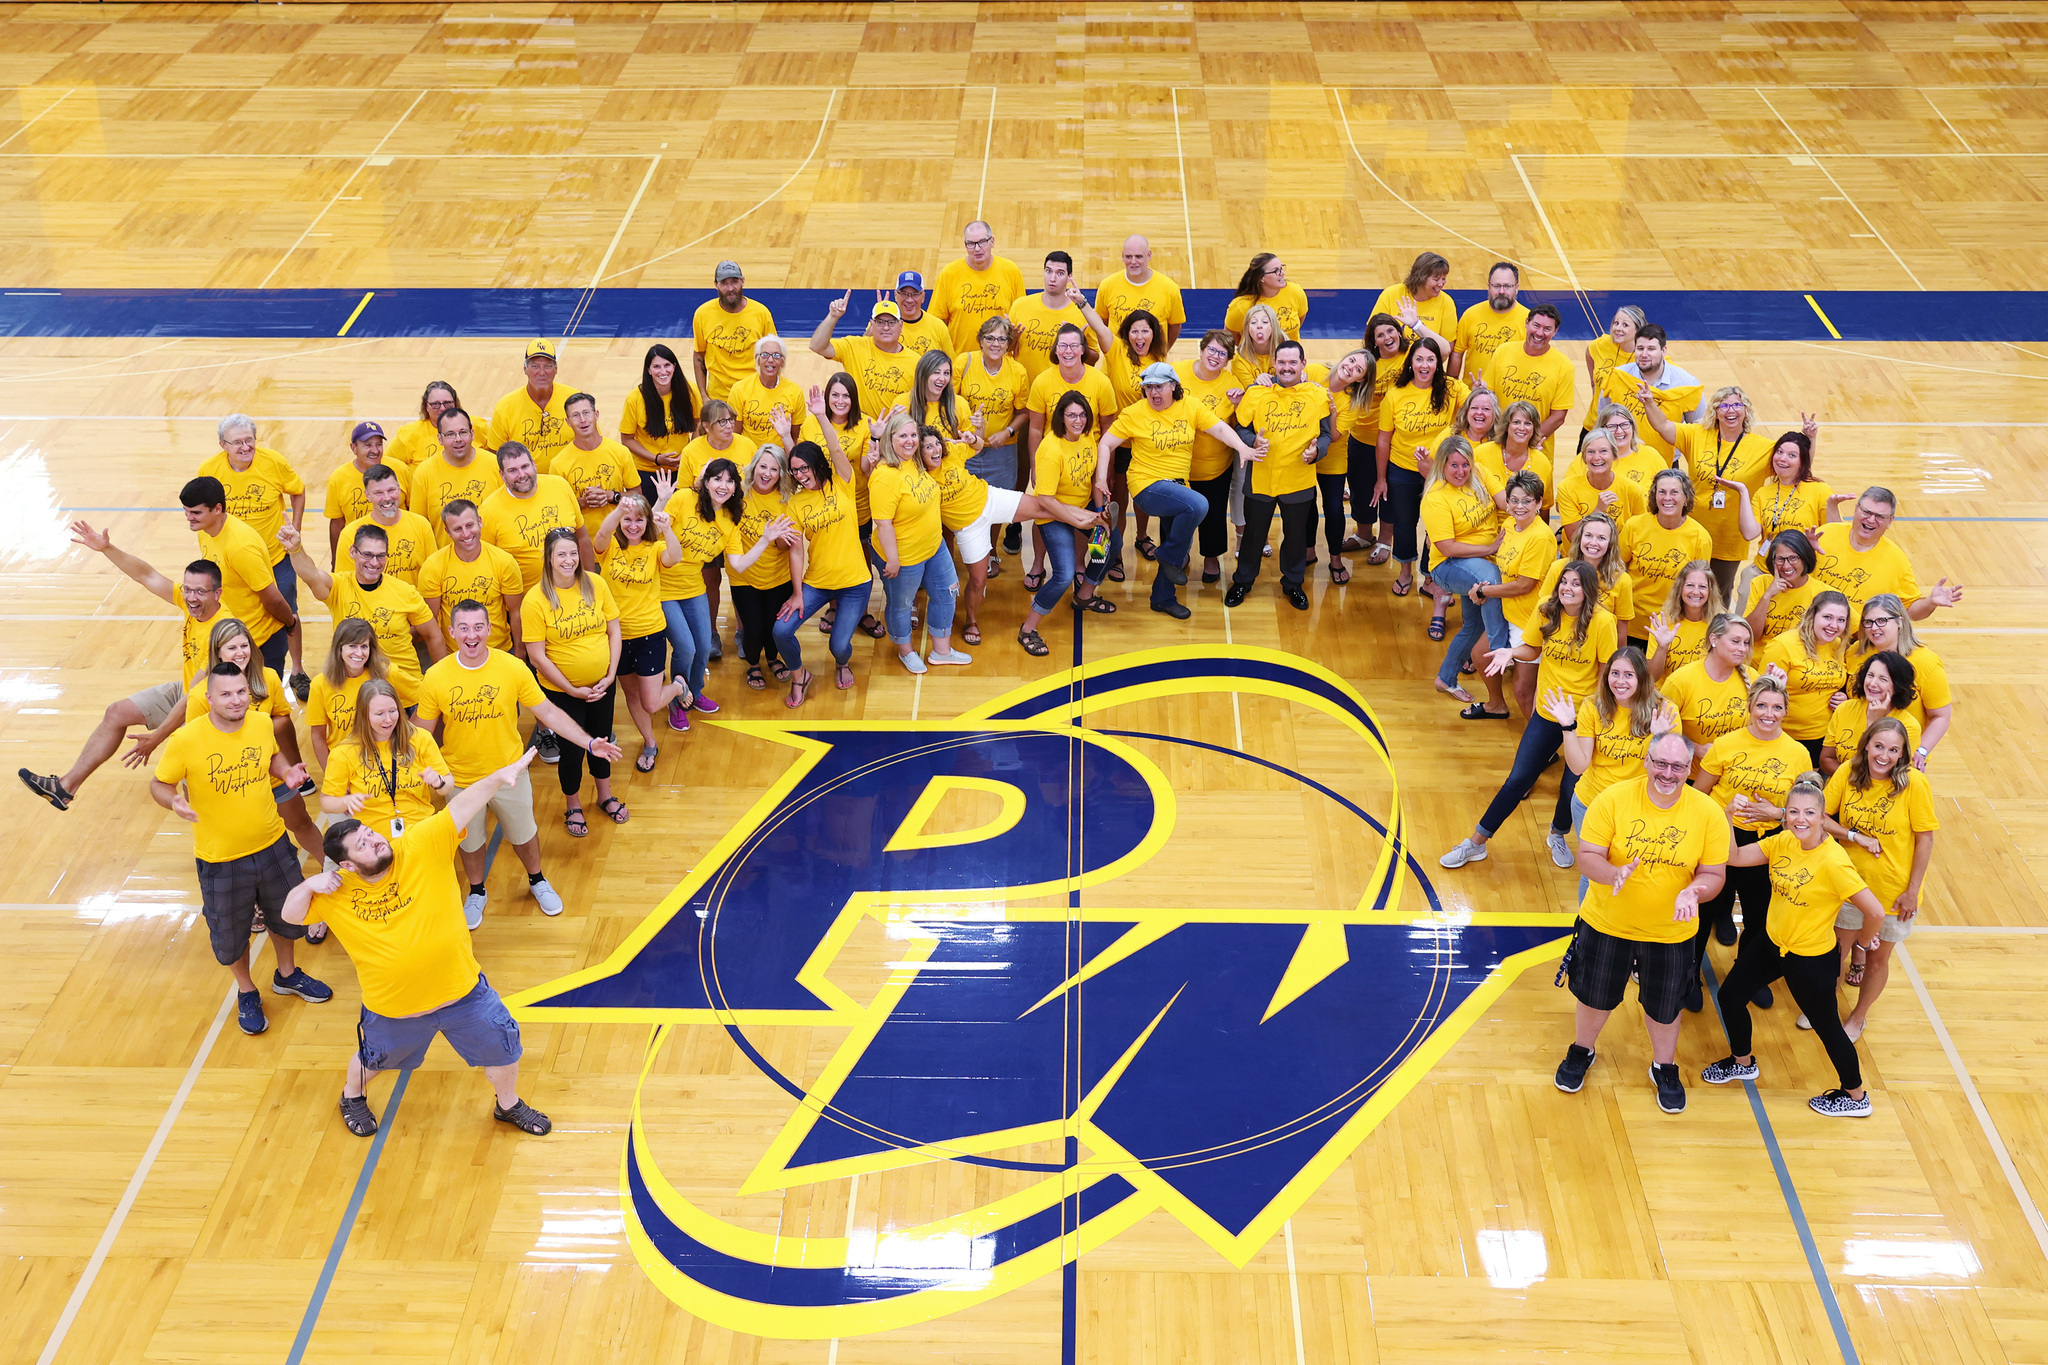 Staff of PW Schools in yellow shirts on a gymnasium floor